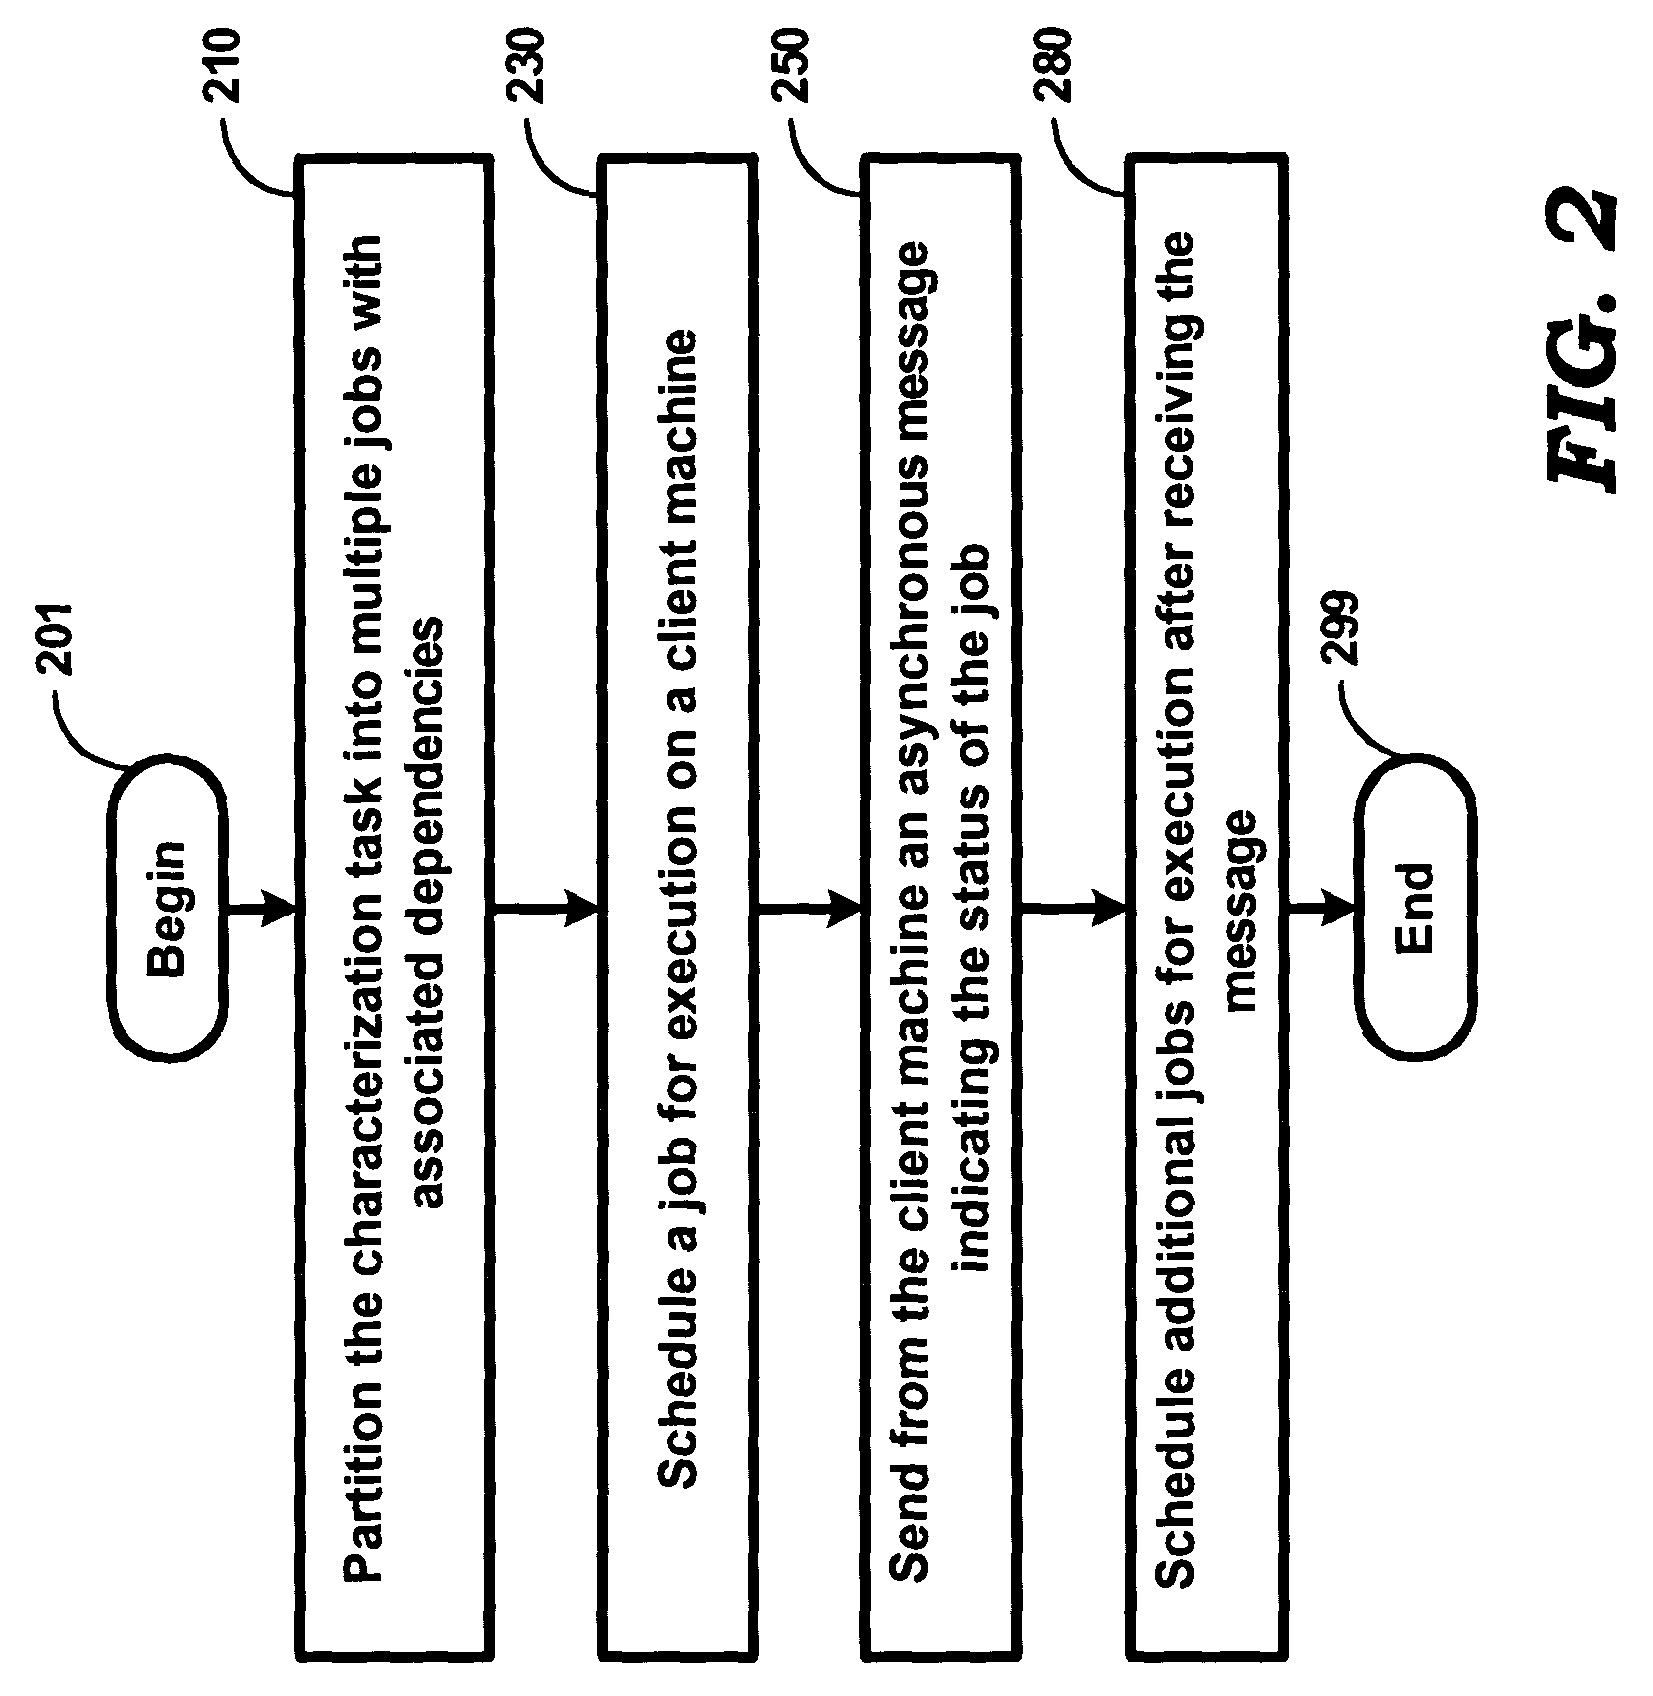 Notifying status of execution of jobs used to characterize cells in an integrated circuit